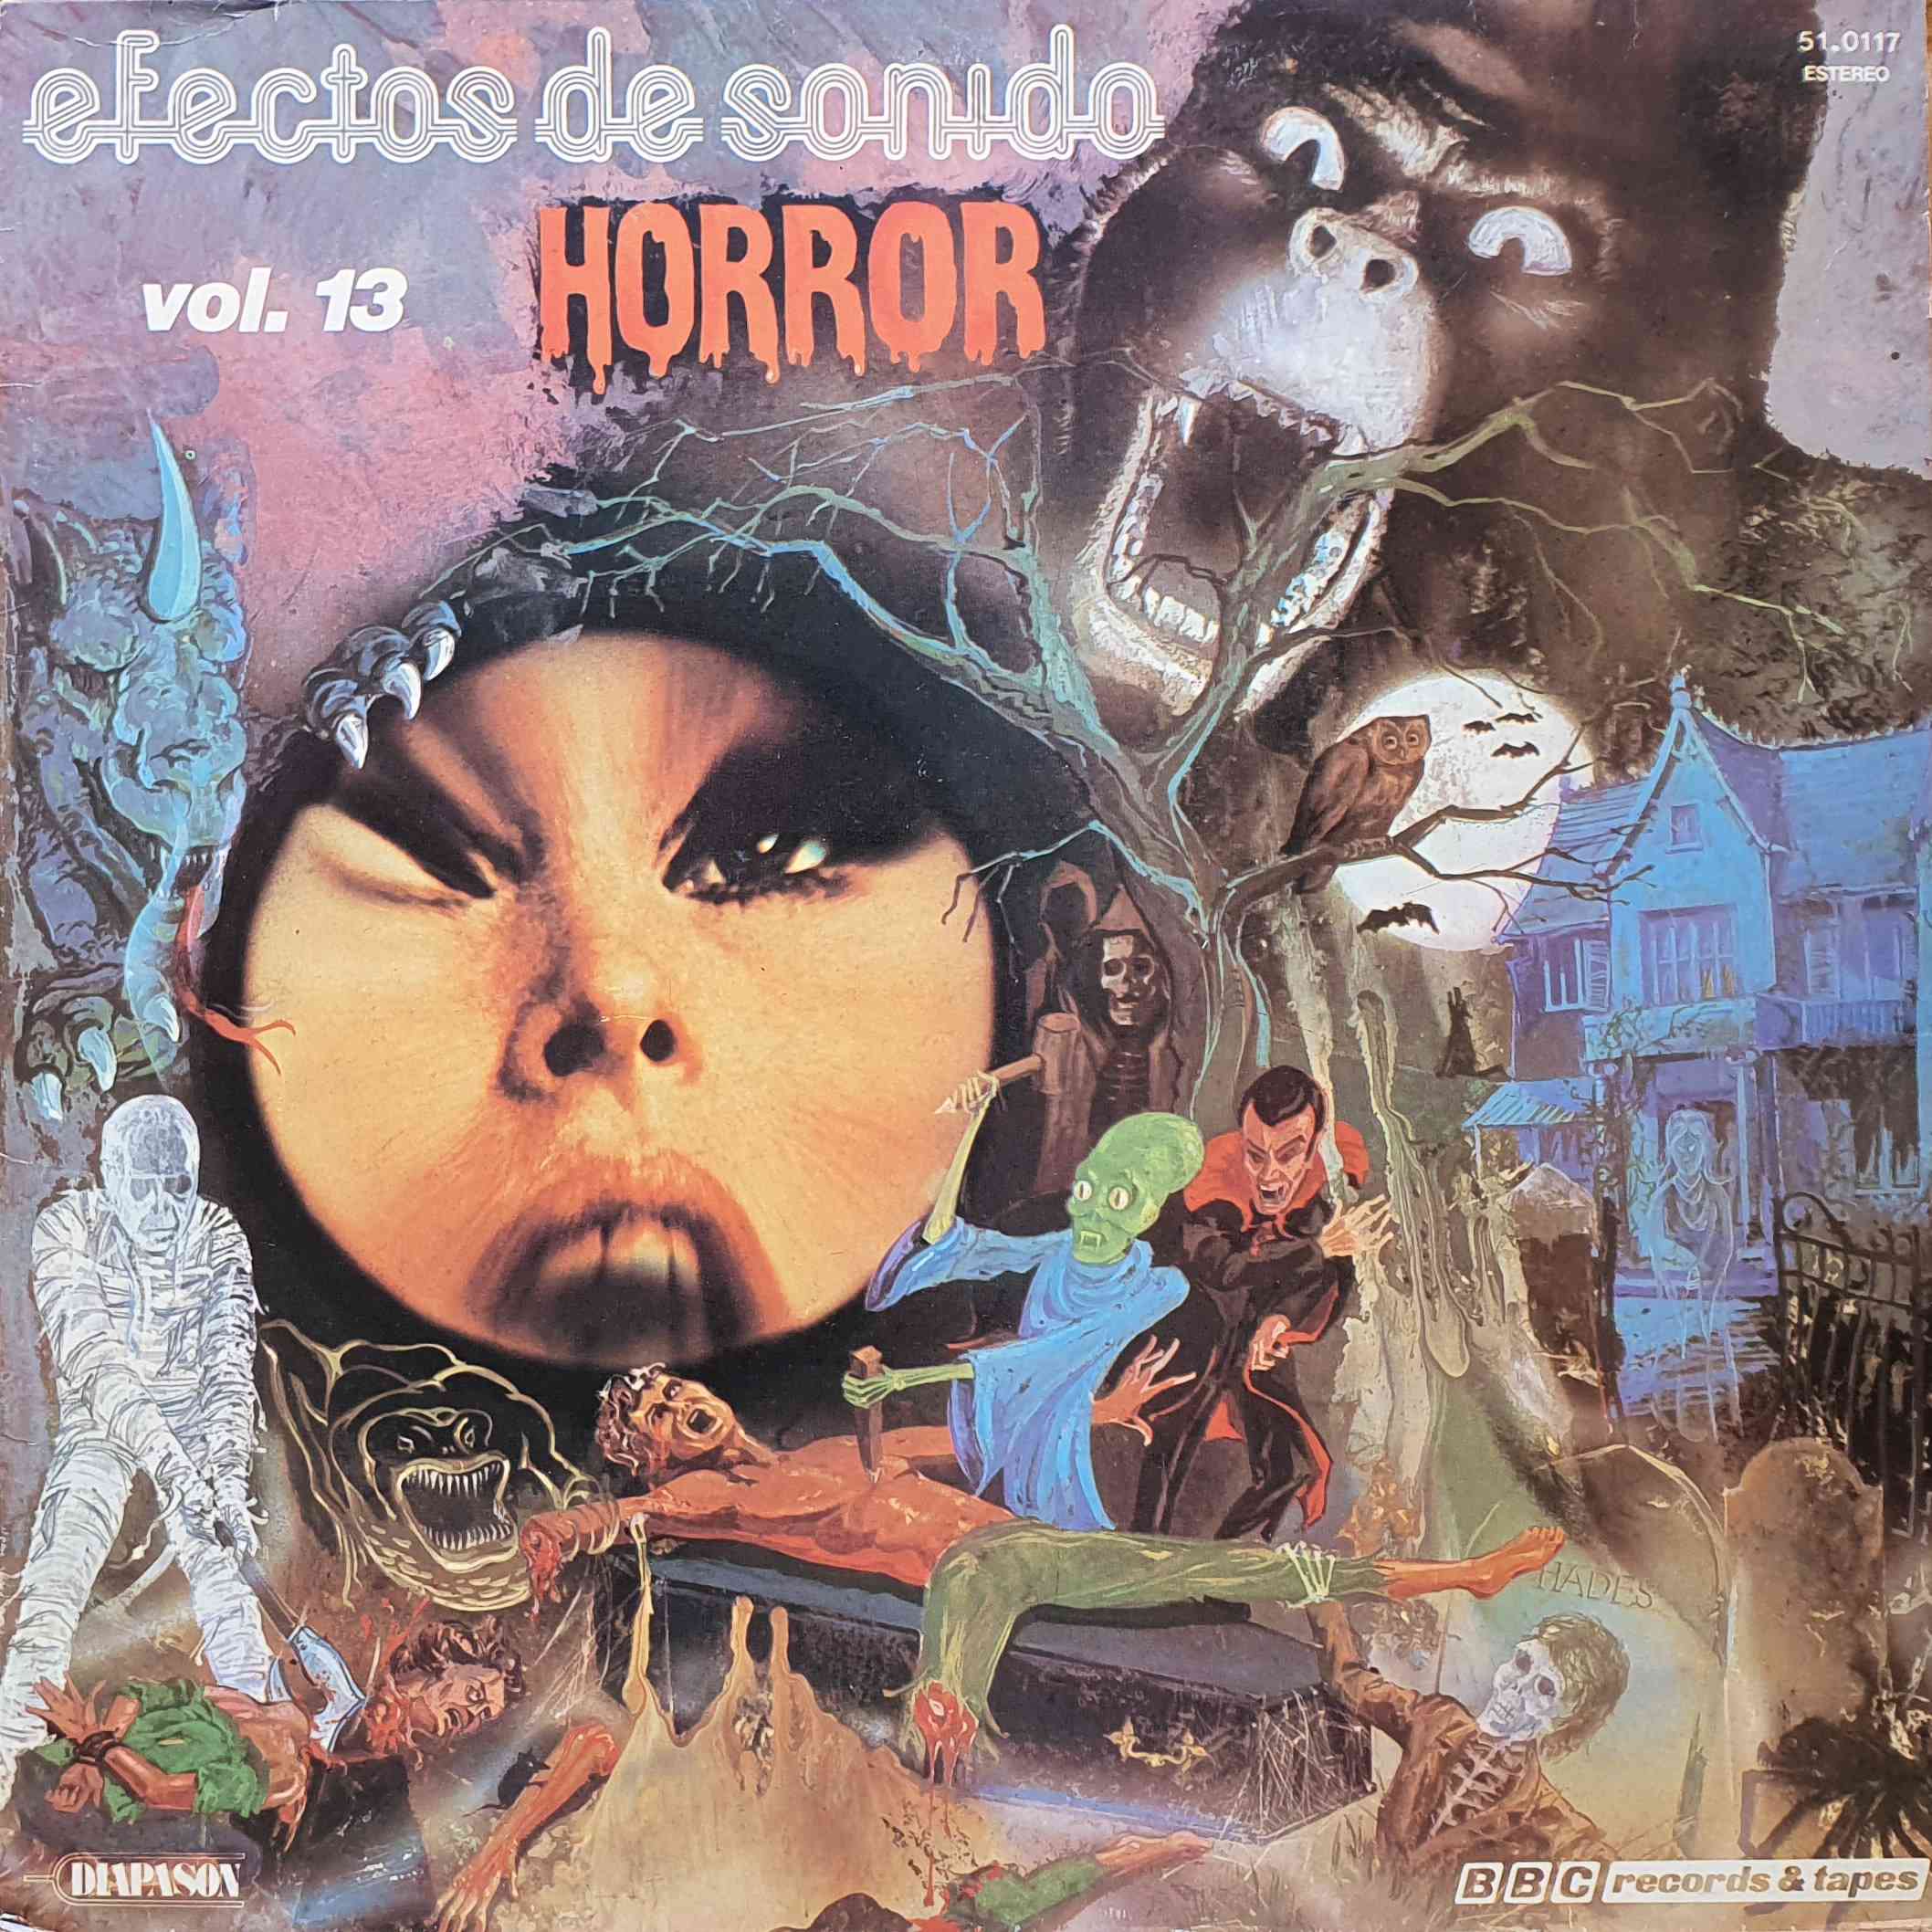 Picture of 51.0117 Efectos de sonido Vol.13 Horror by artist Various from the BBC albums - Records and Tapes library